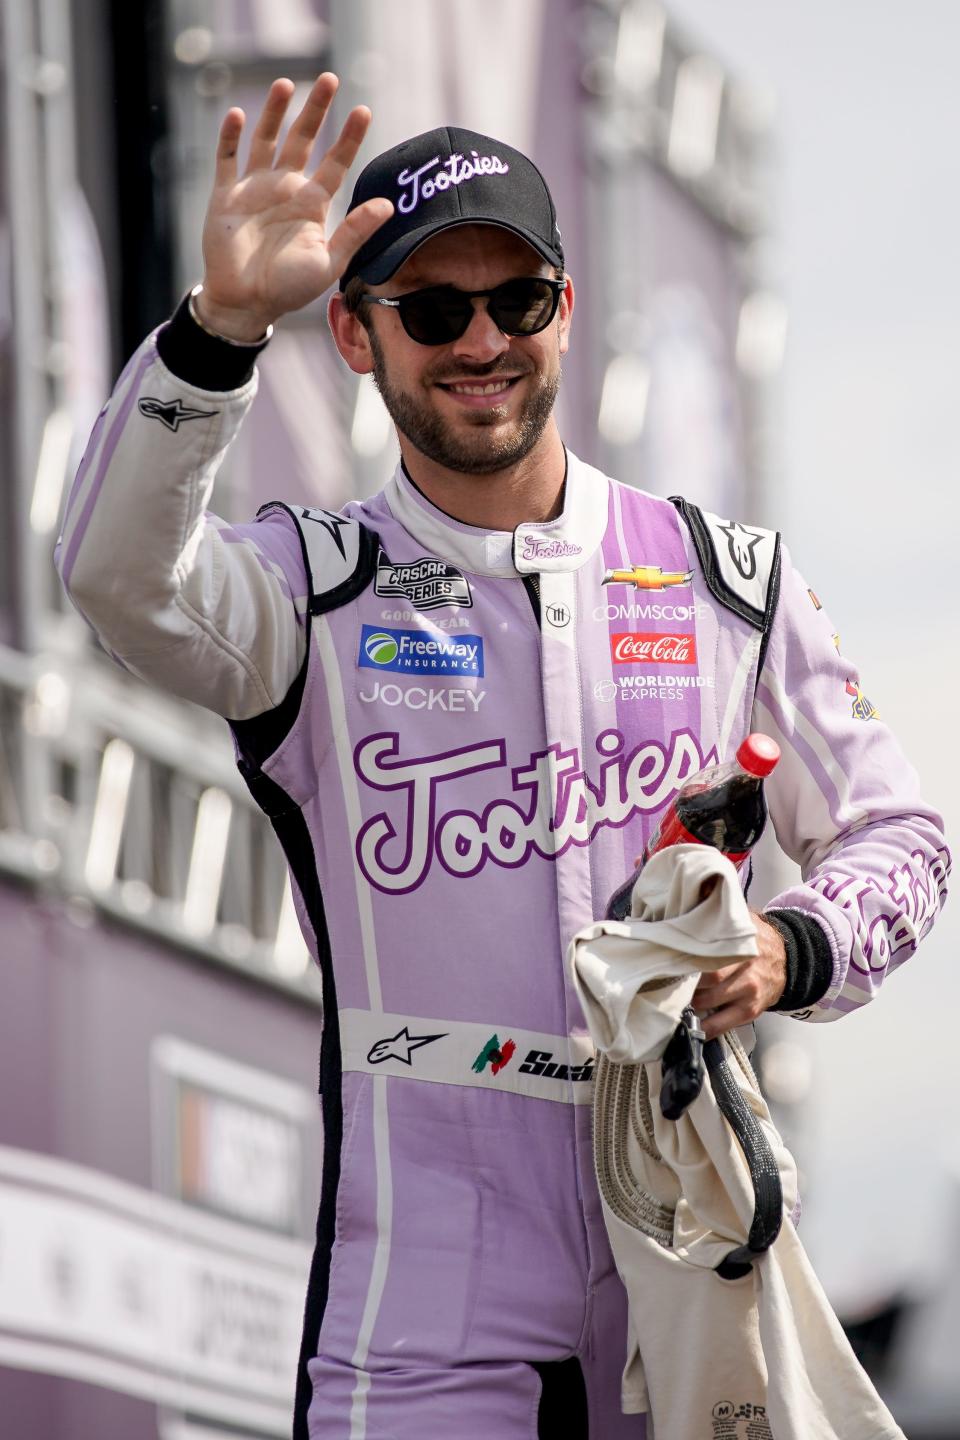 NASCAR Cup Series driver Daniel Suarez (99) is introduced during the Ally 400 at the Nashville Superspeedway in Lebanon, Tenn., Sunday, June 26, 2022.